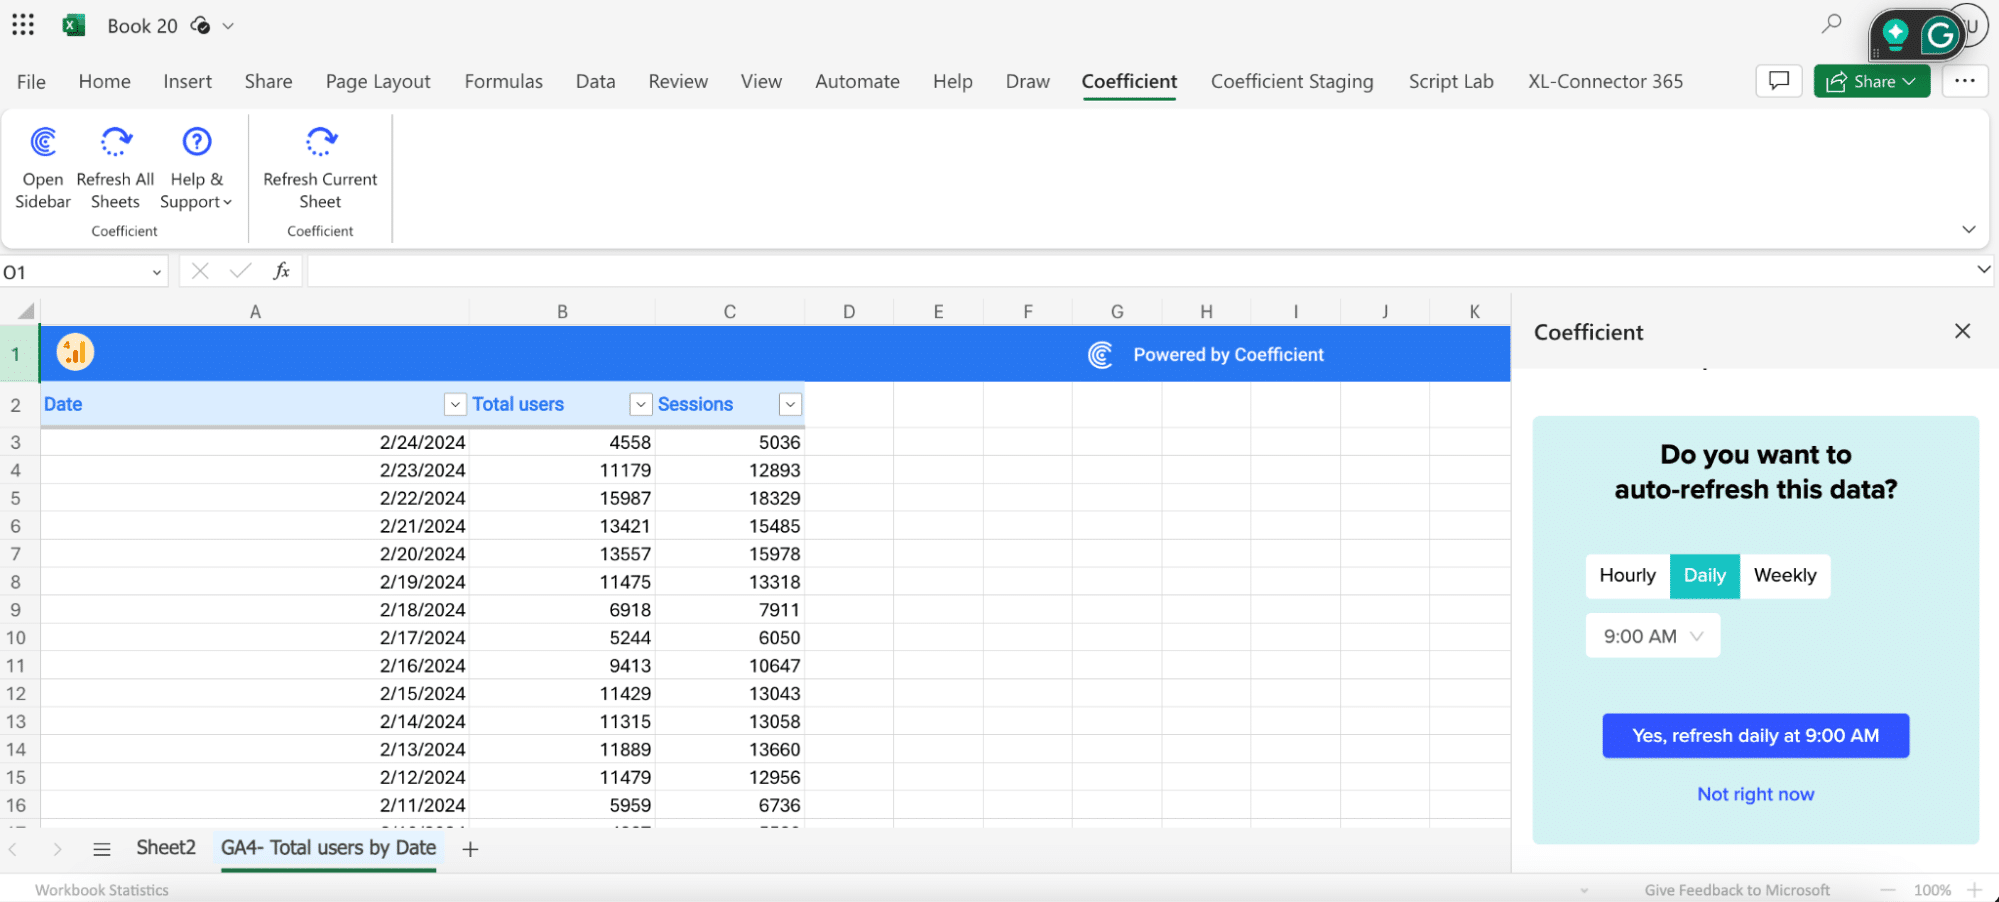 Finalizing GA4 data export to Excel with the 'Import' button in Coefficient